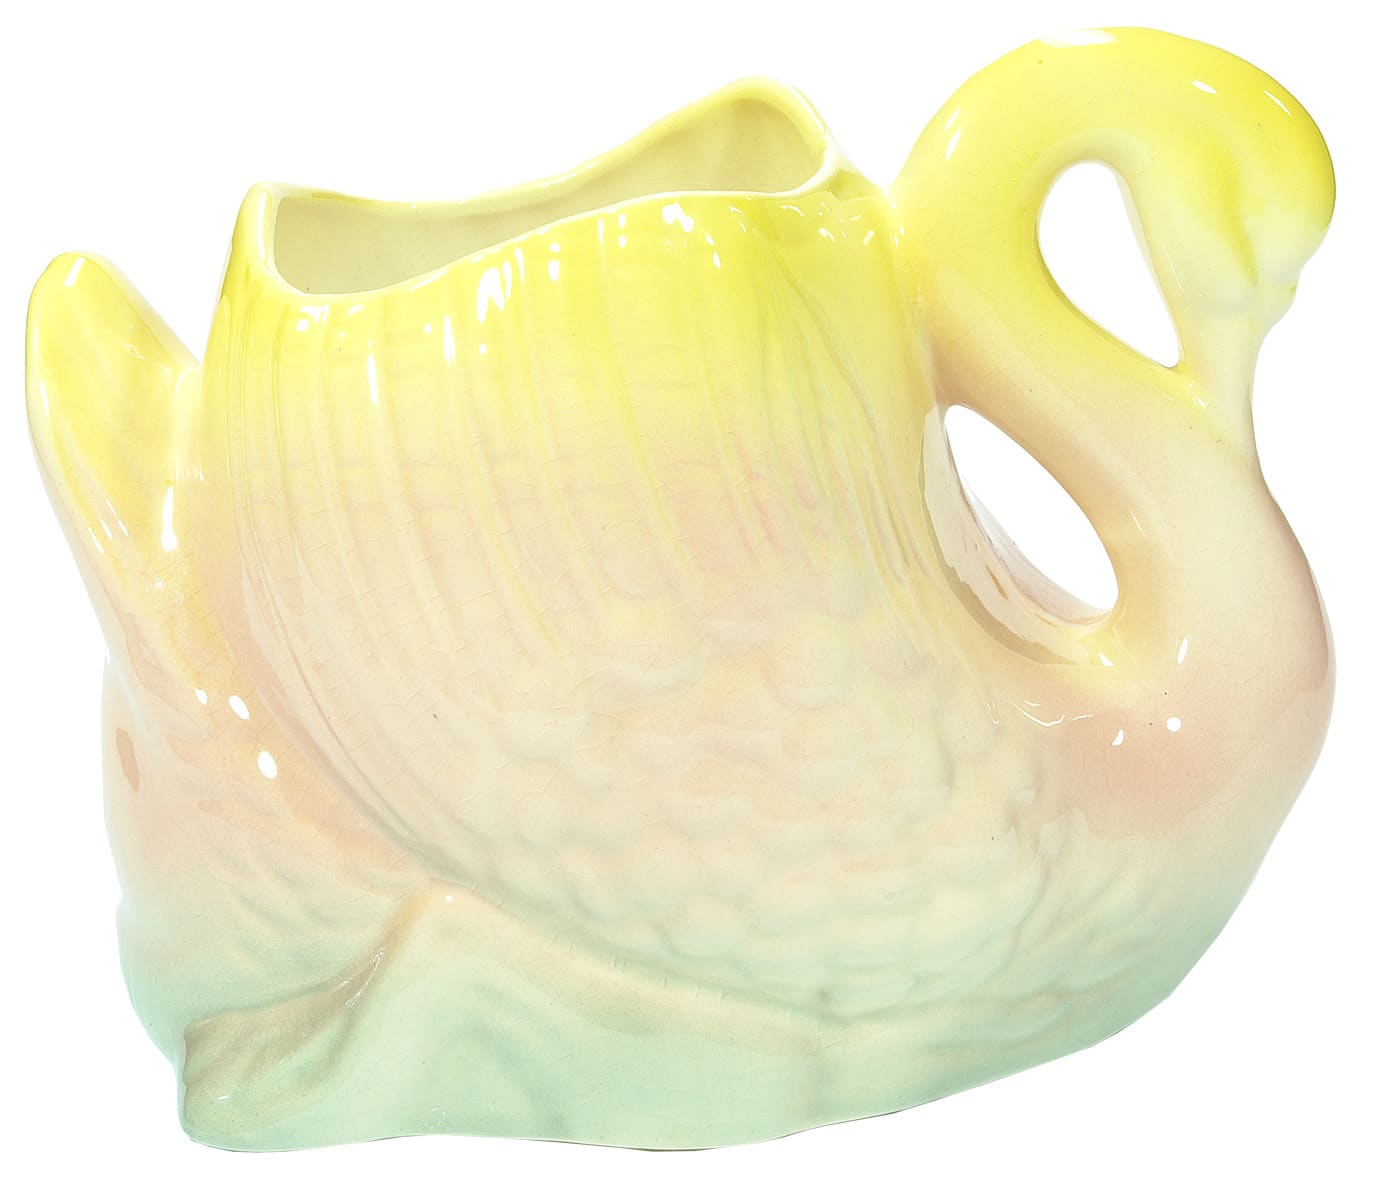 Swan Vase Pates Potters Belmore New South Wales